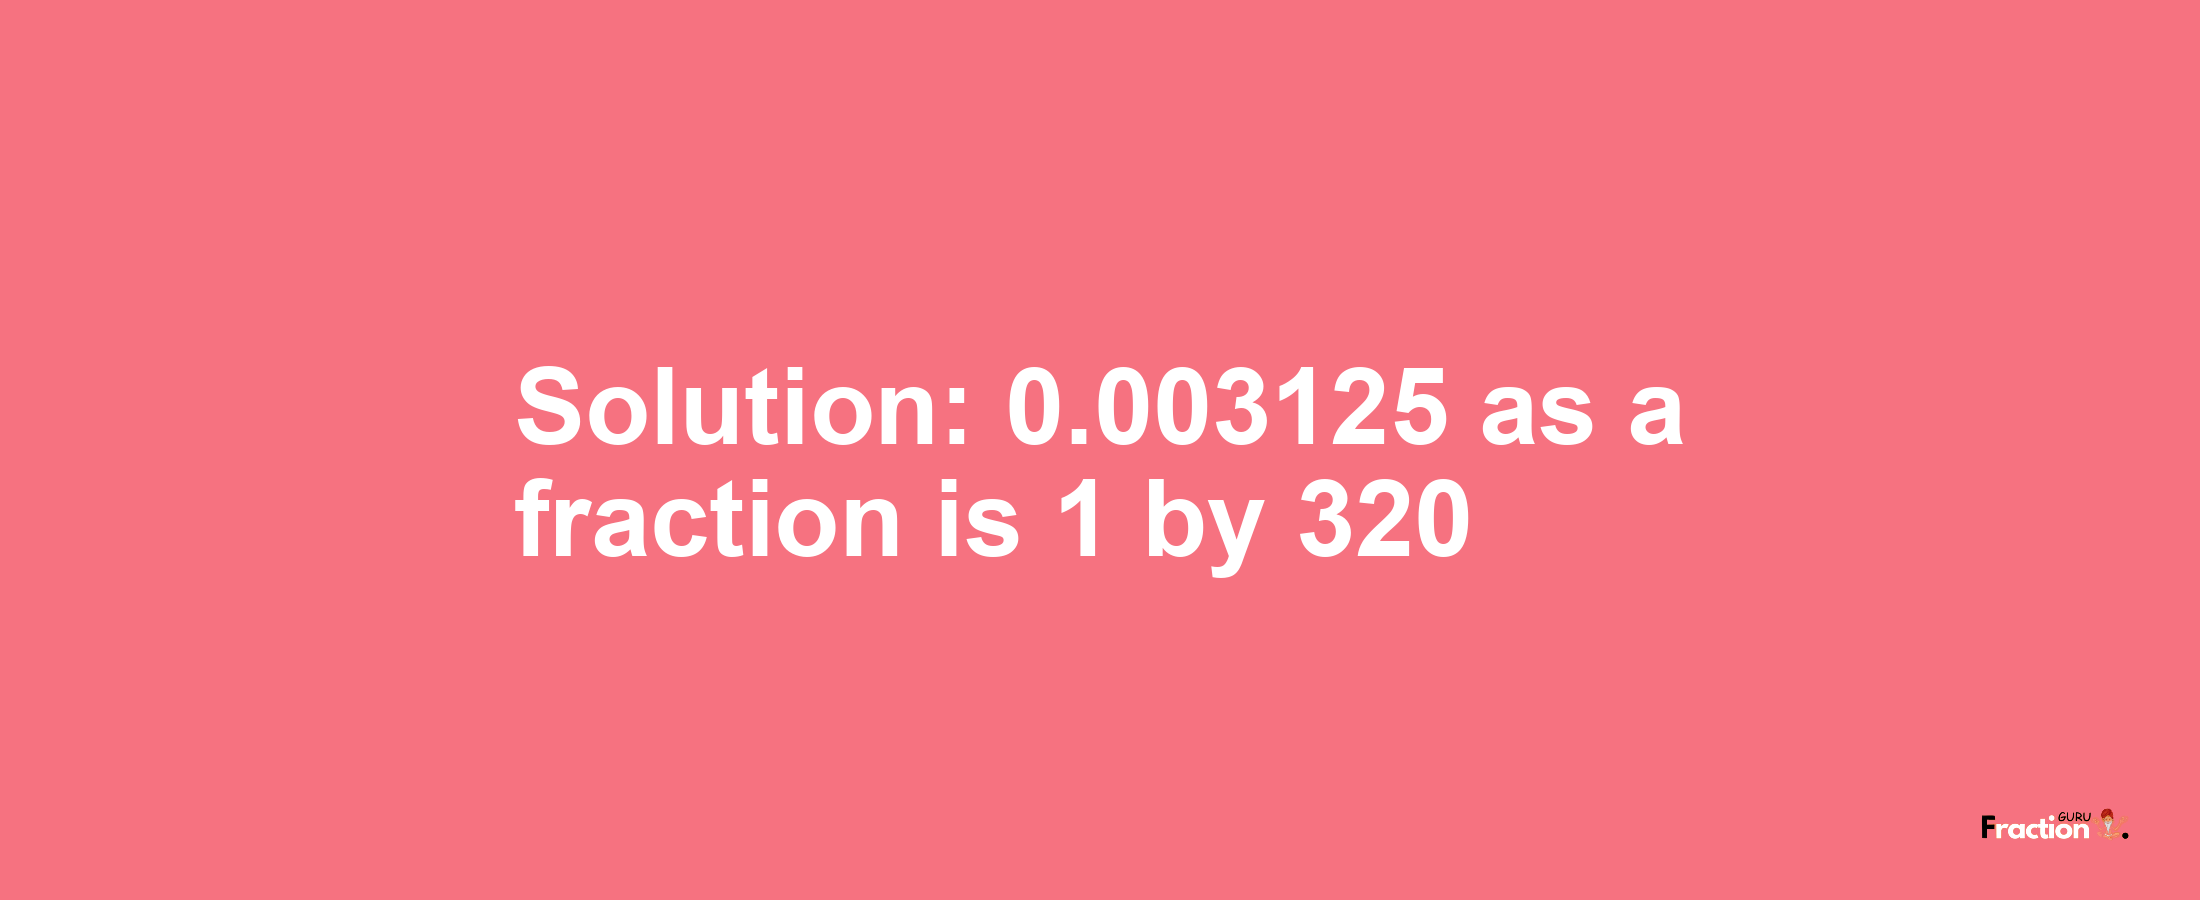 Solution:0.003125 as a fraction is 1/320